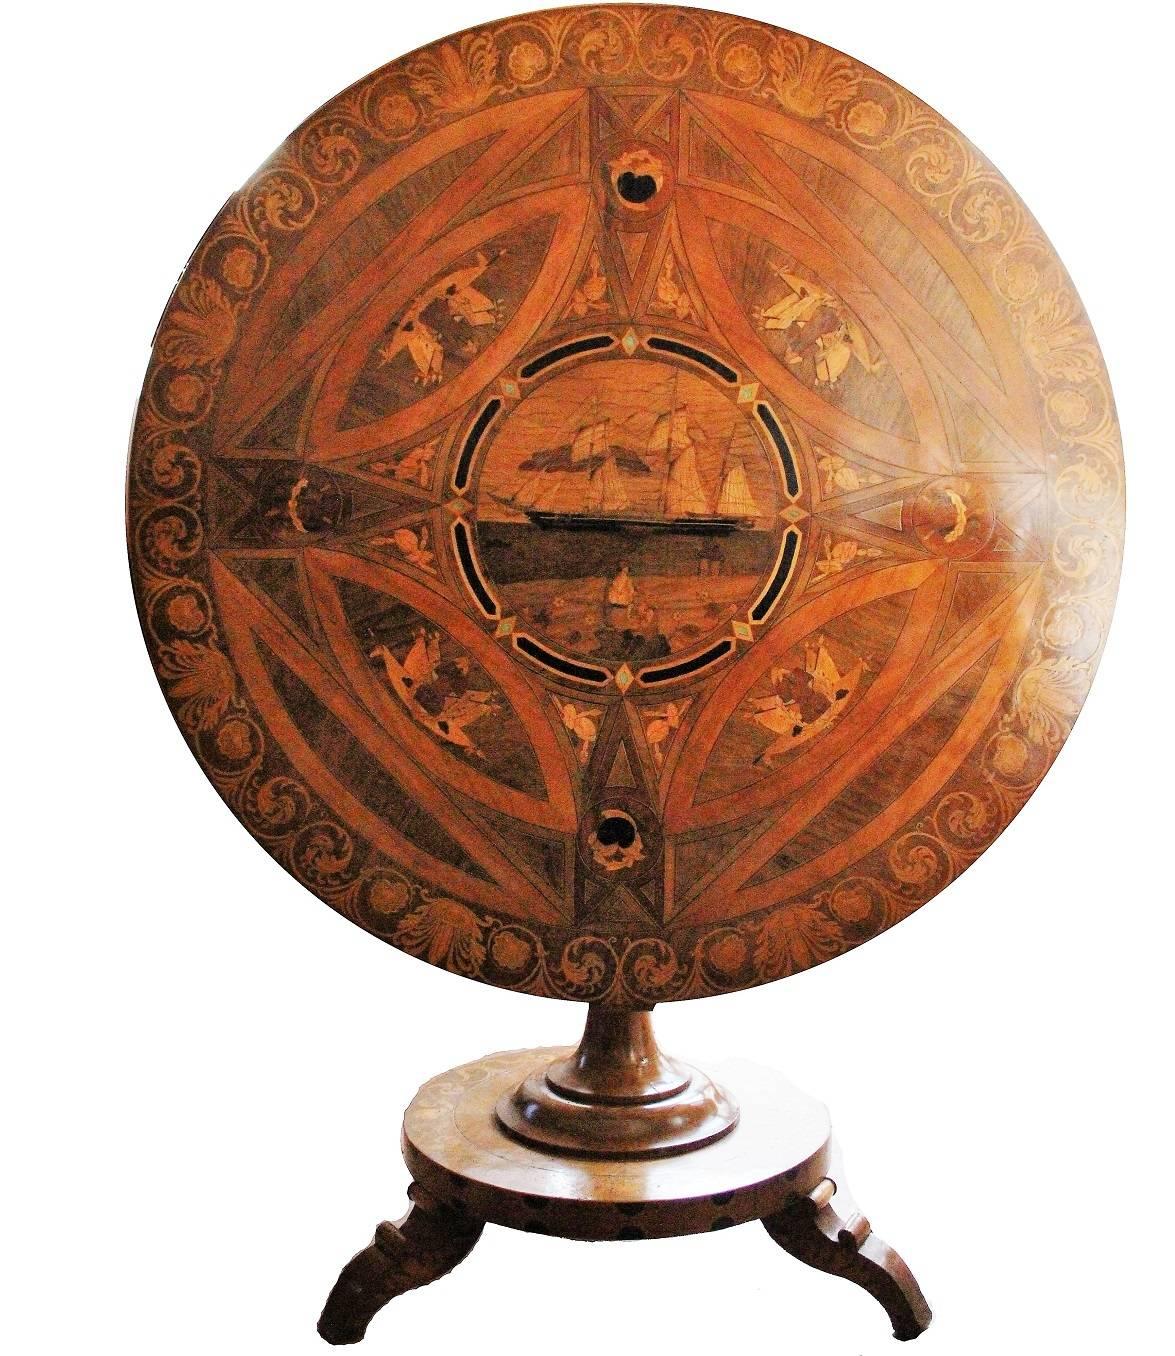 Rare mid-19th century Sorrento marquetry tilt-top centre table, the circular top extensively inlaid with various woods including olive, boxwood and others, some stained, depicting a central marinescape roundel, with various borders inlaid with